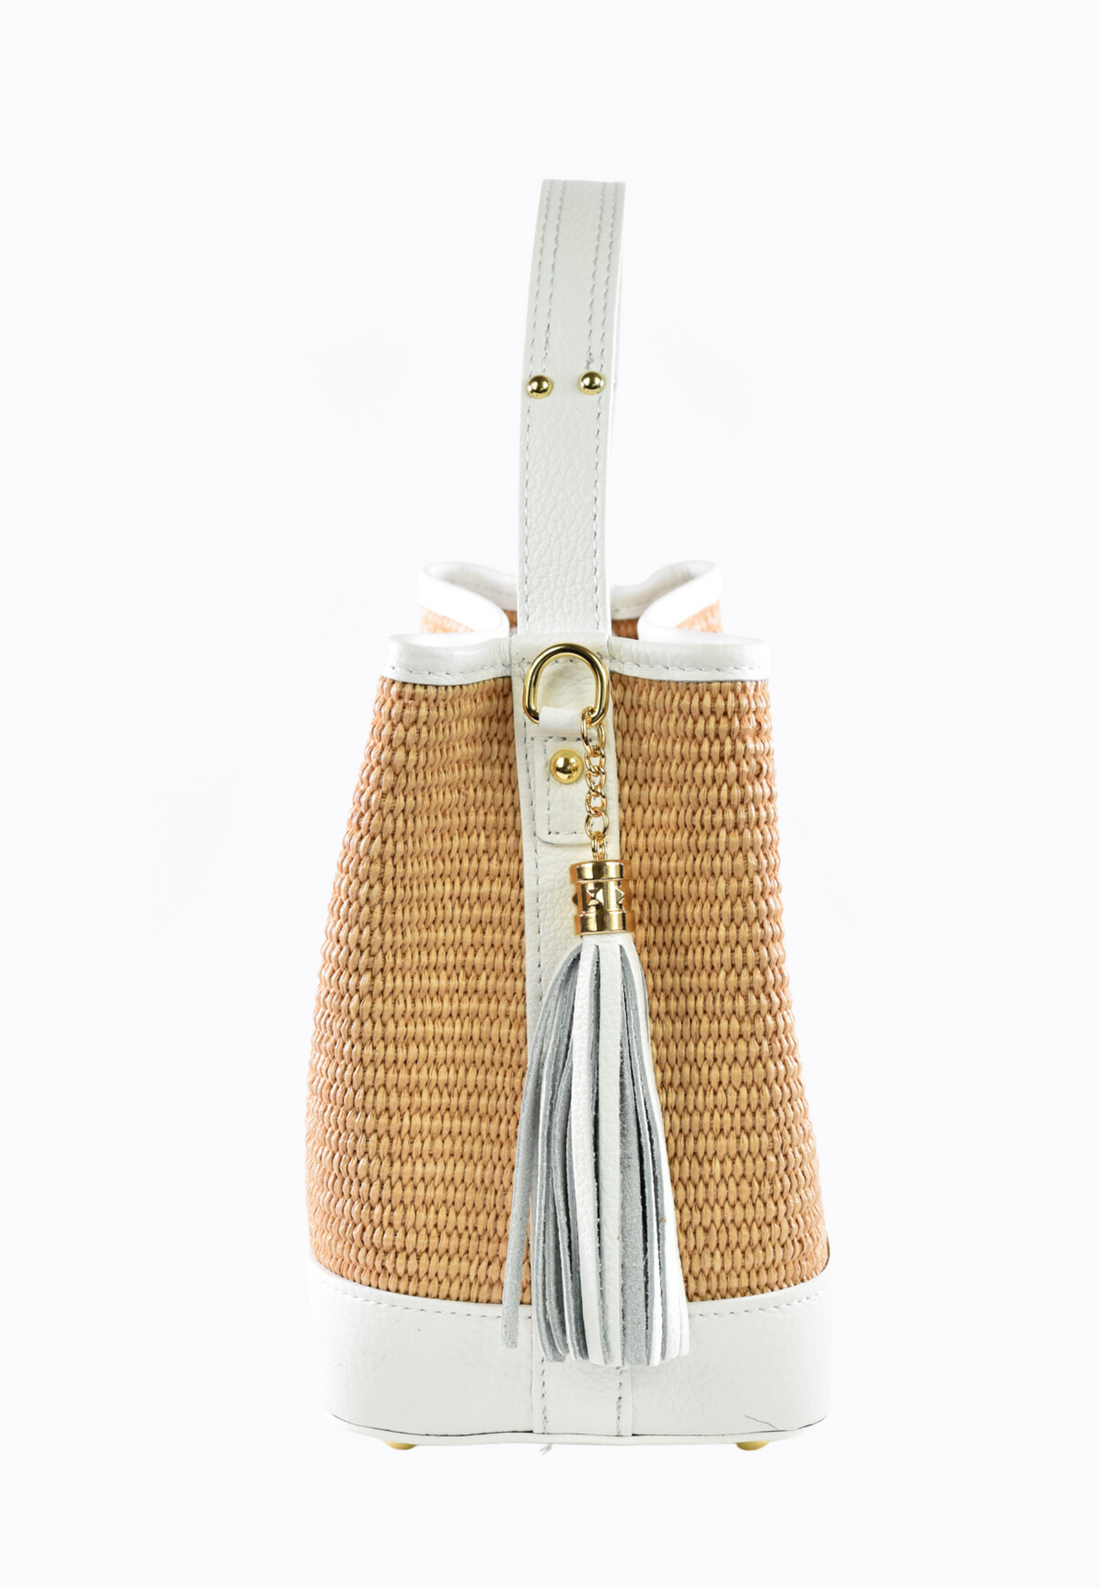 Kendy bag in White Dollar leather